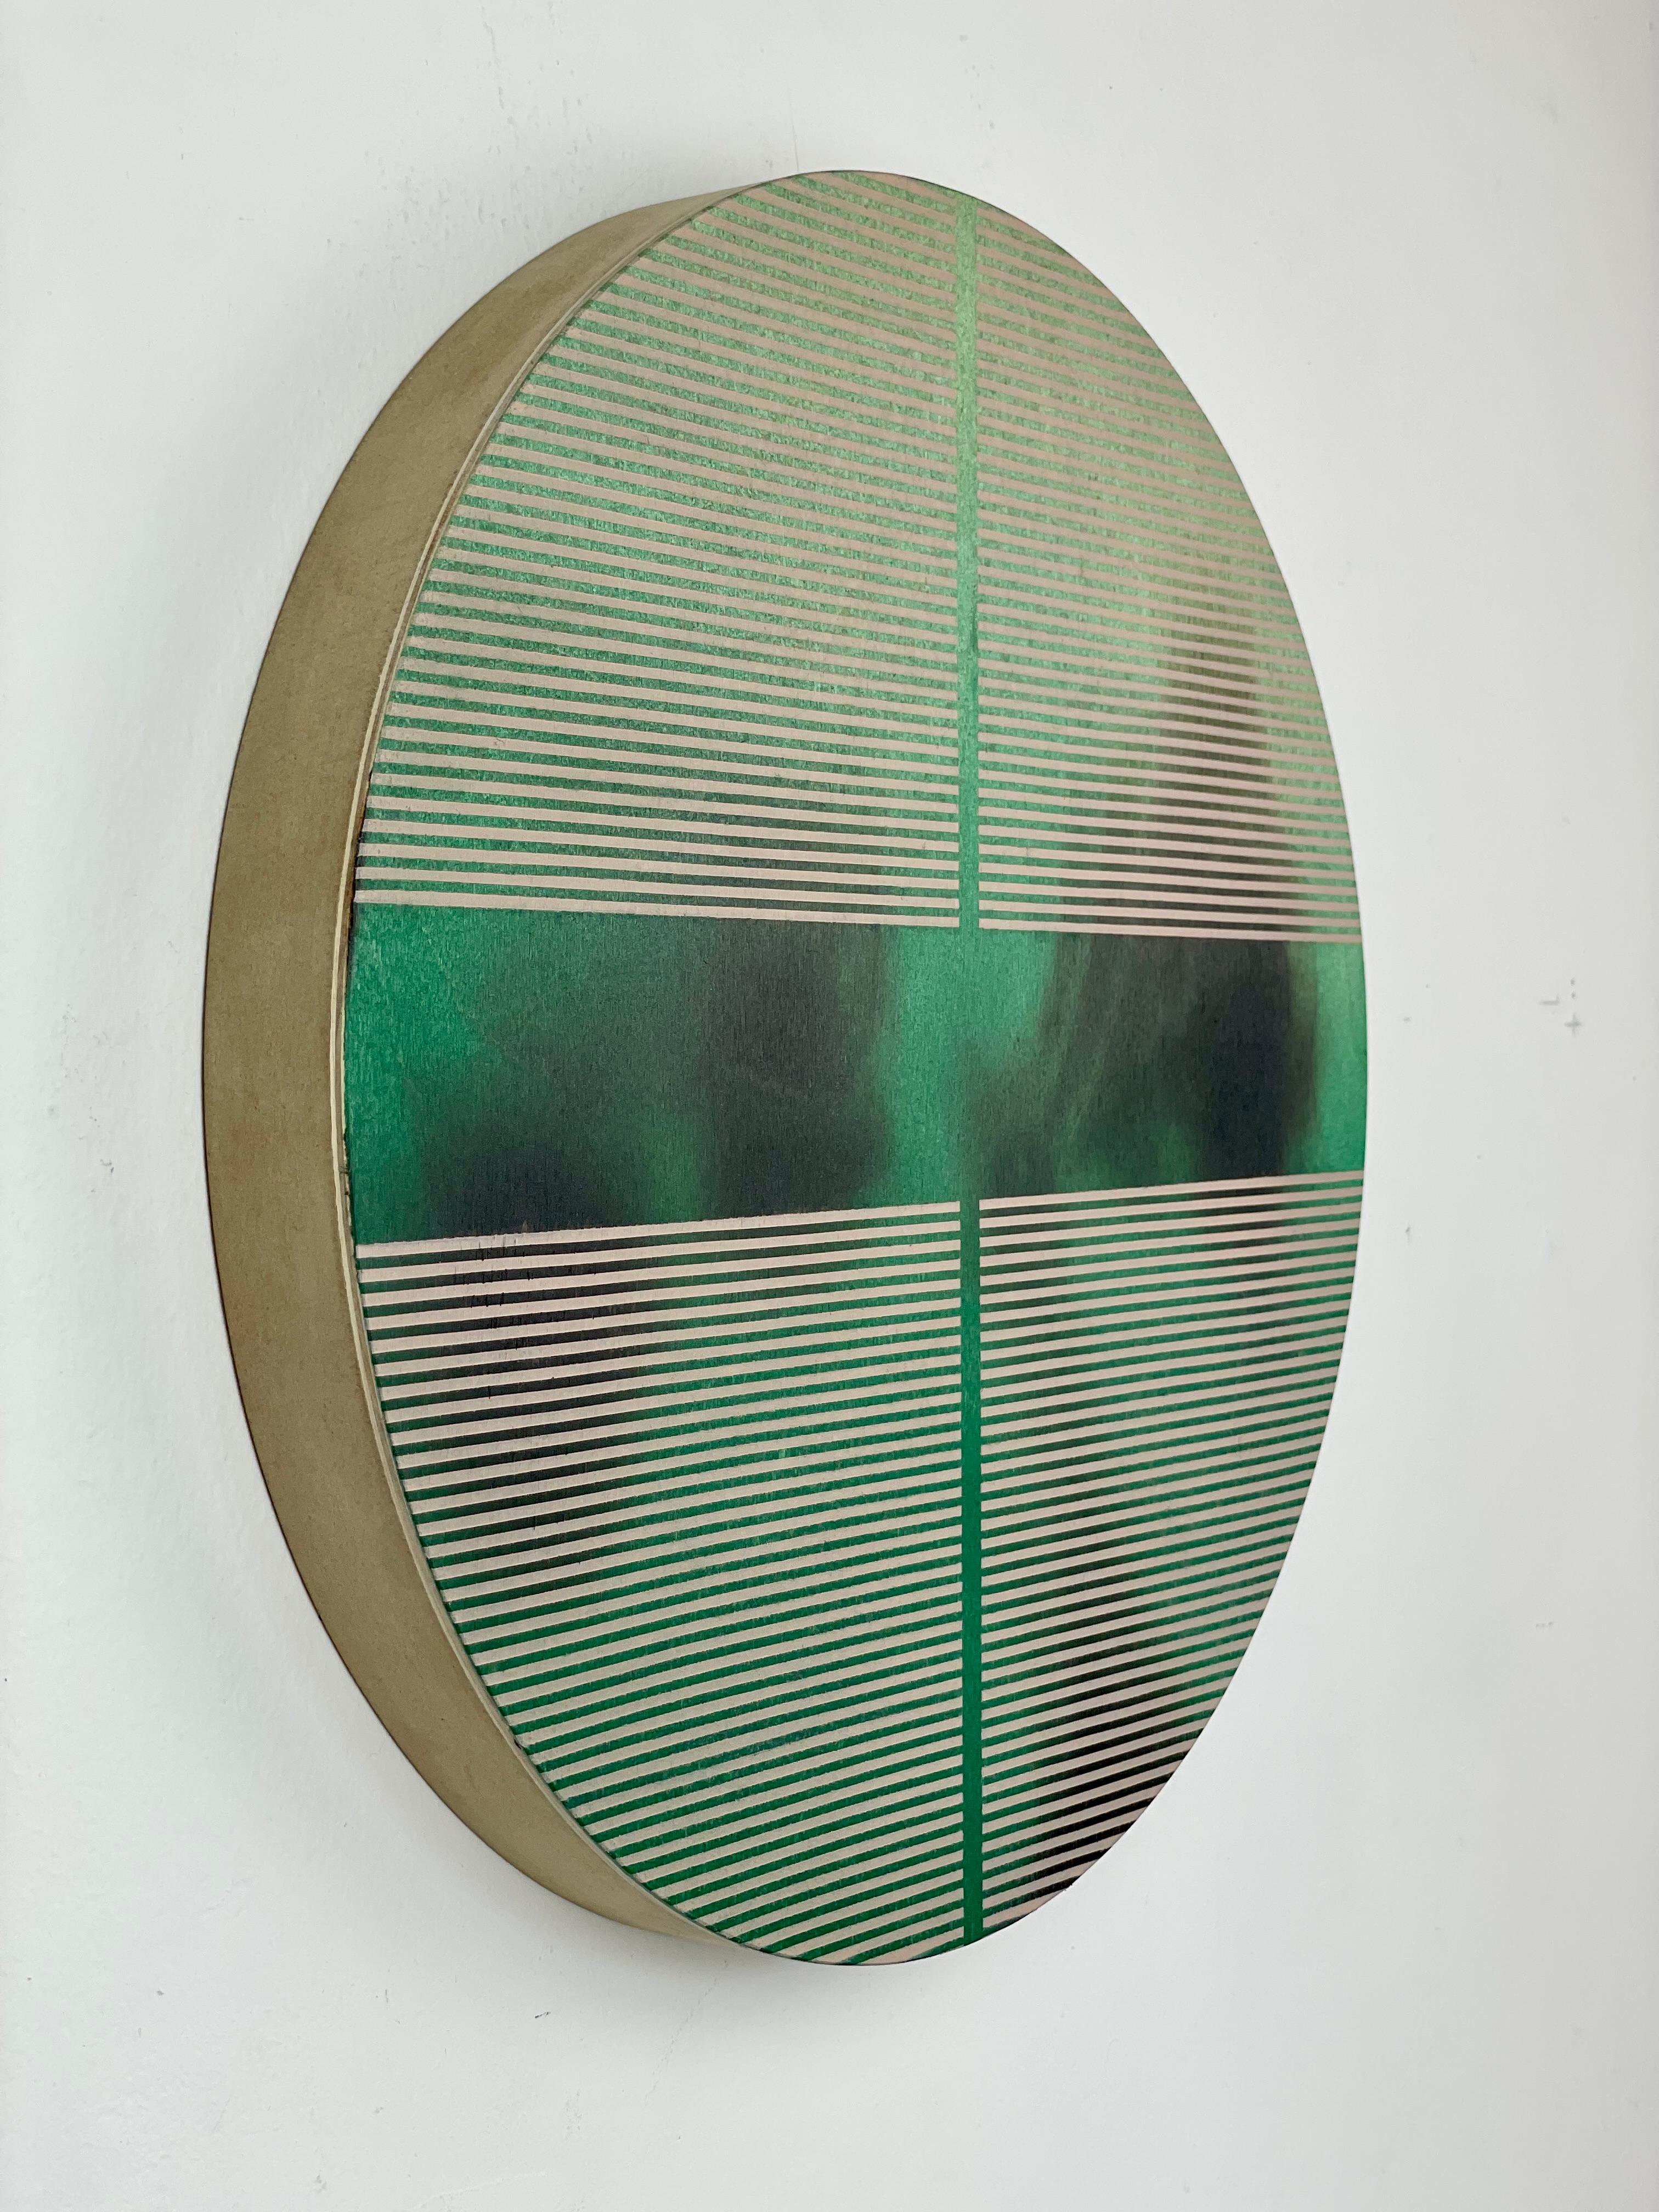 Emerald green pill (minimaliste grid round painting on wood dopamine art) - Abstract Geometric Mixed Media Art by Melisa Taylor Metzger